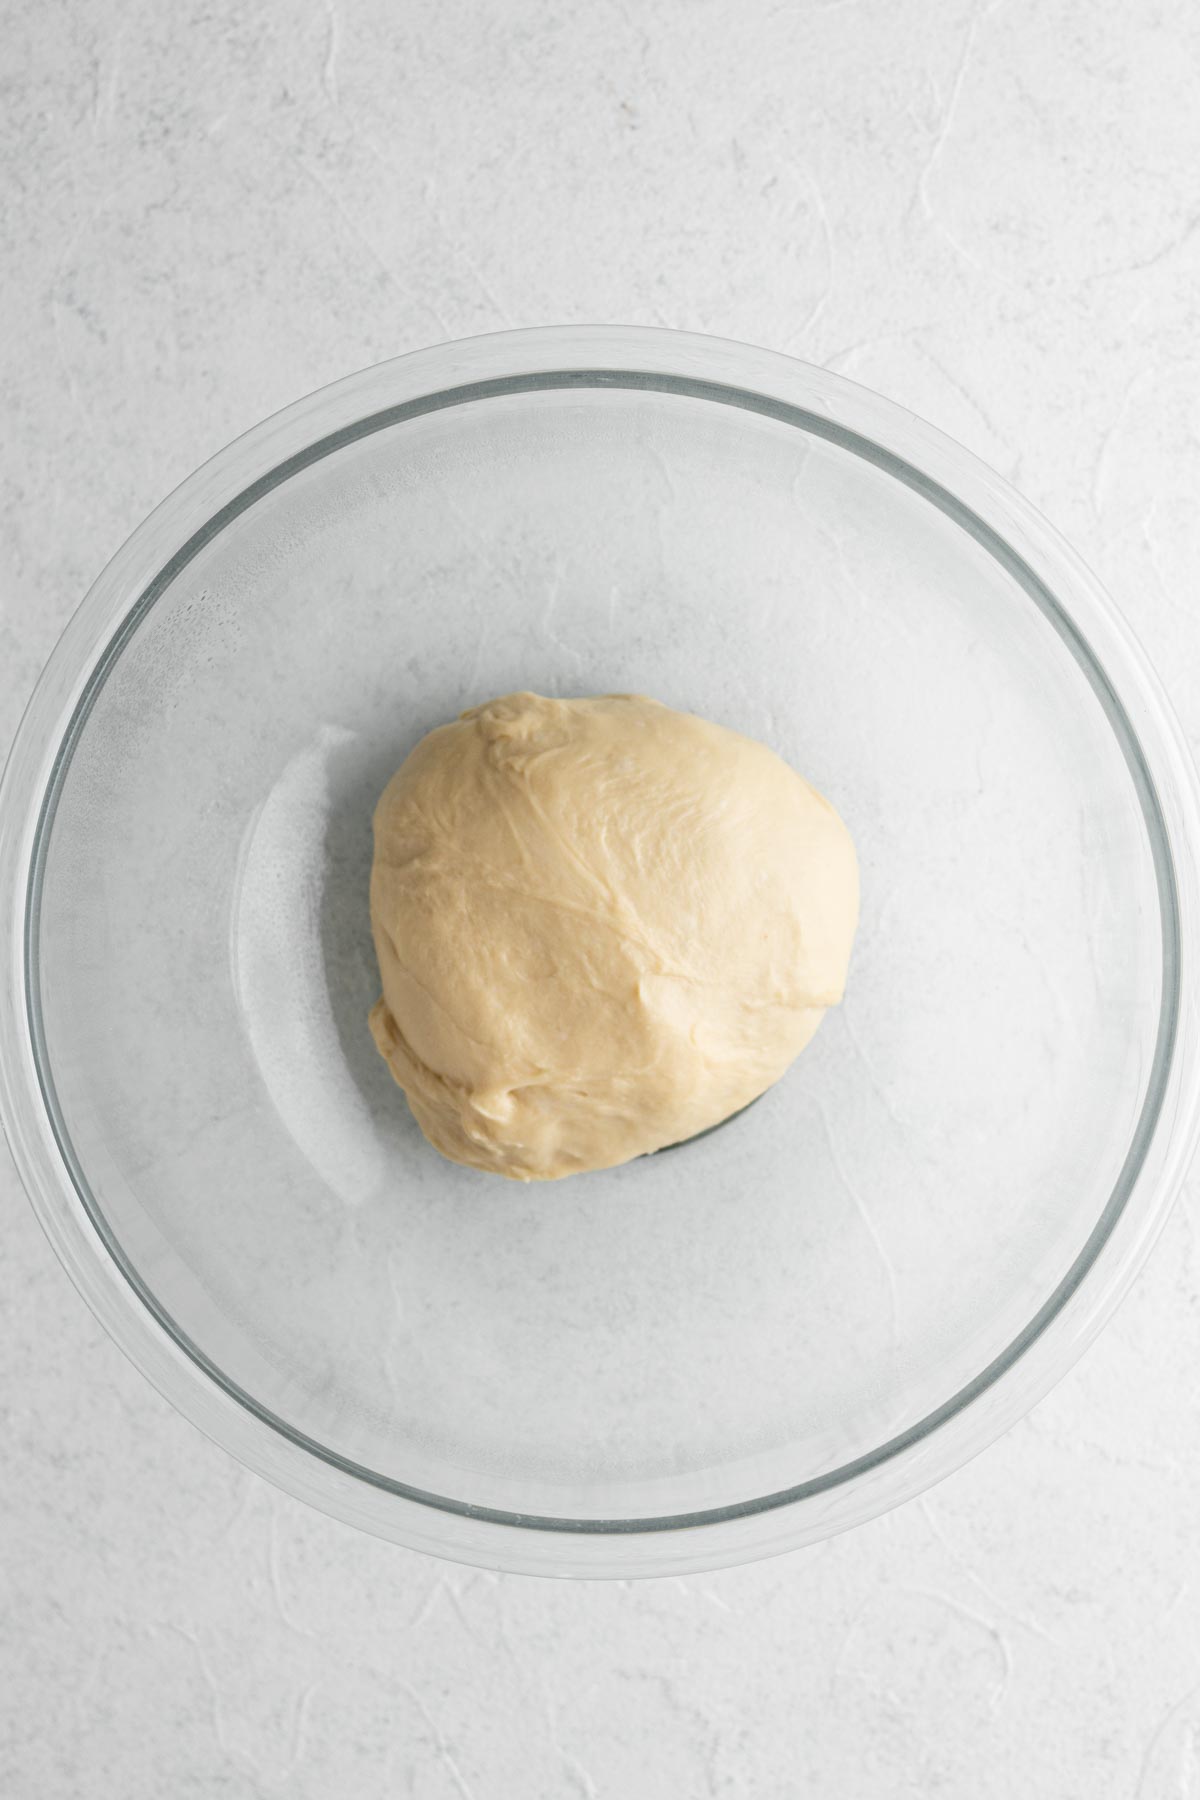 Ball of brioche dough in a glass mixing ball on a white surface.